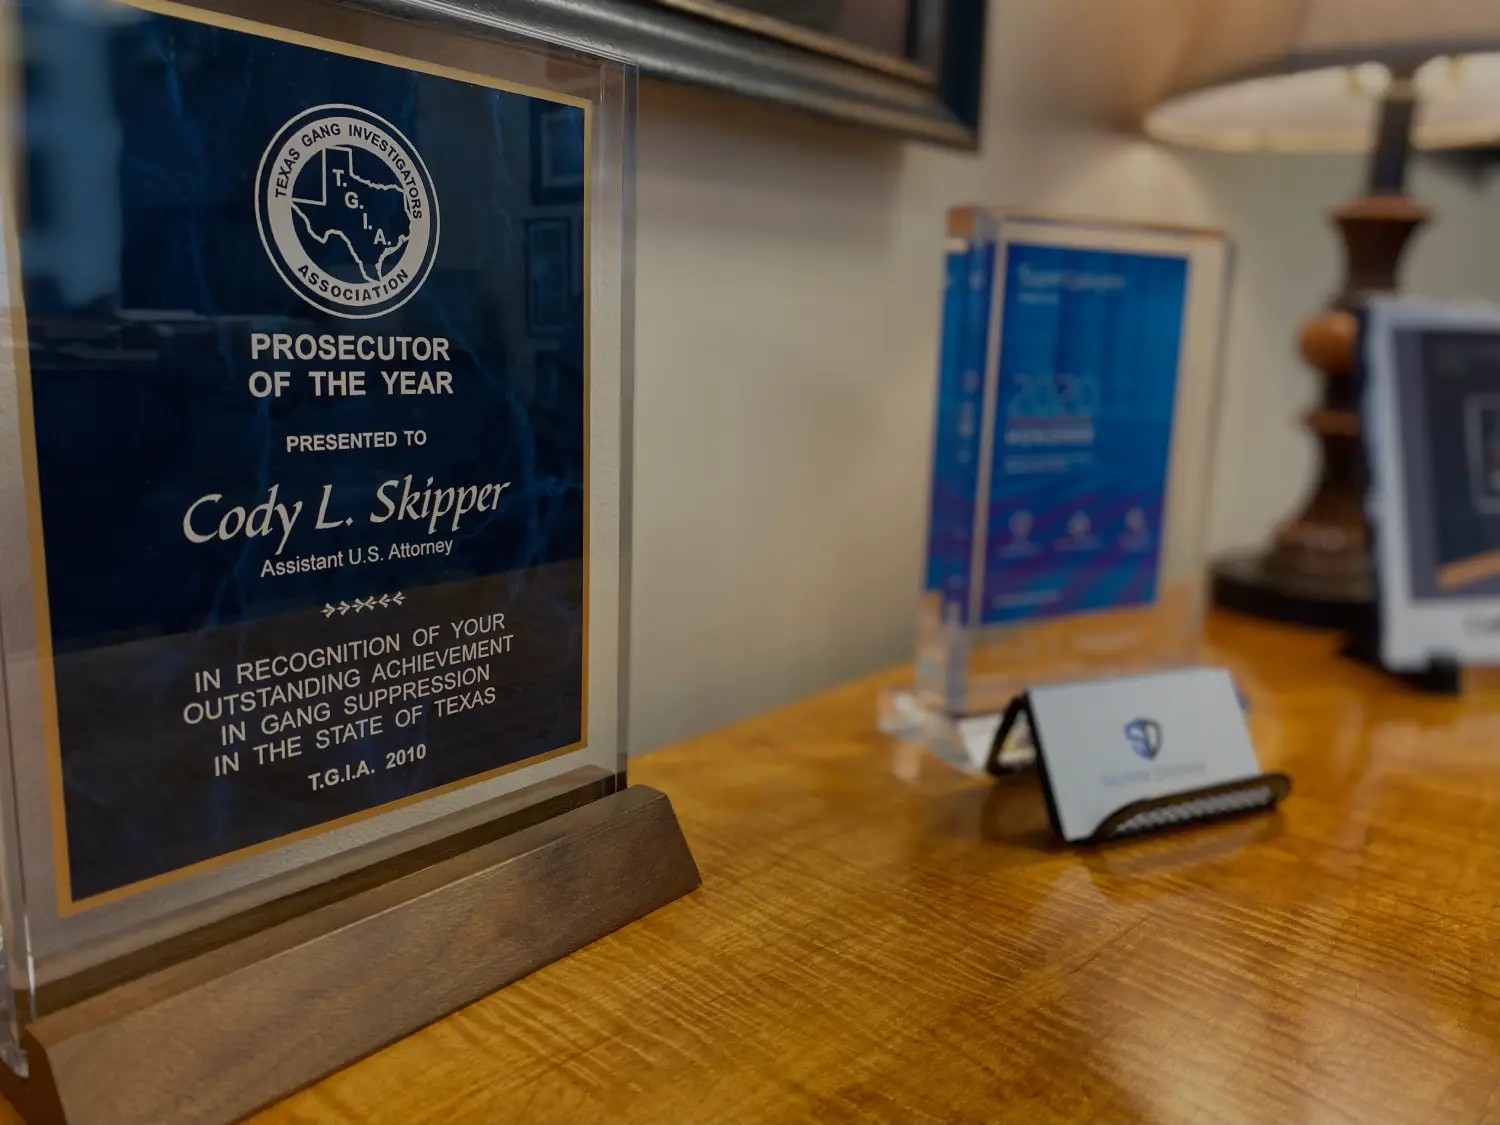 A picture of the prosecutor of the year award to Cody L. Skipper